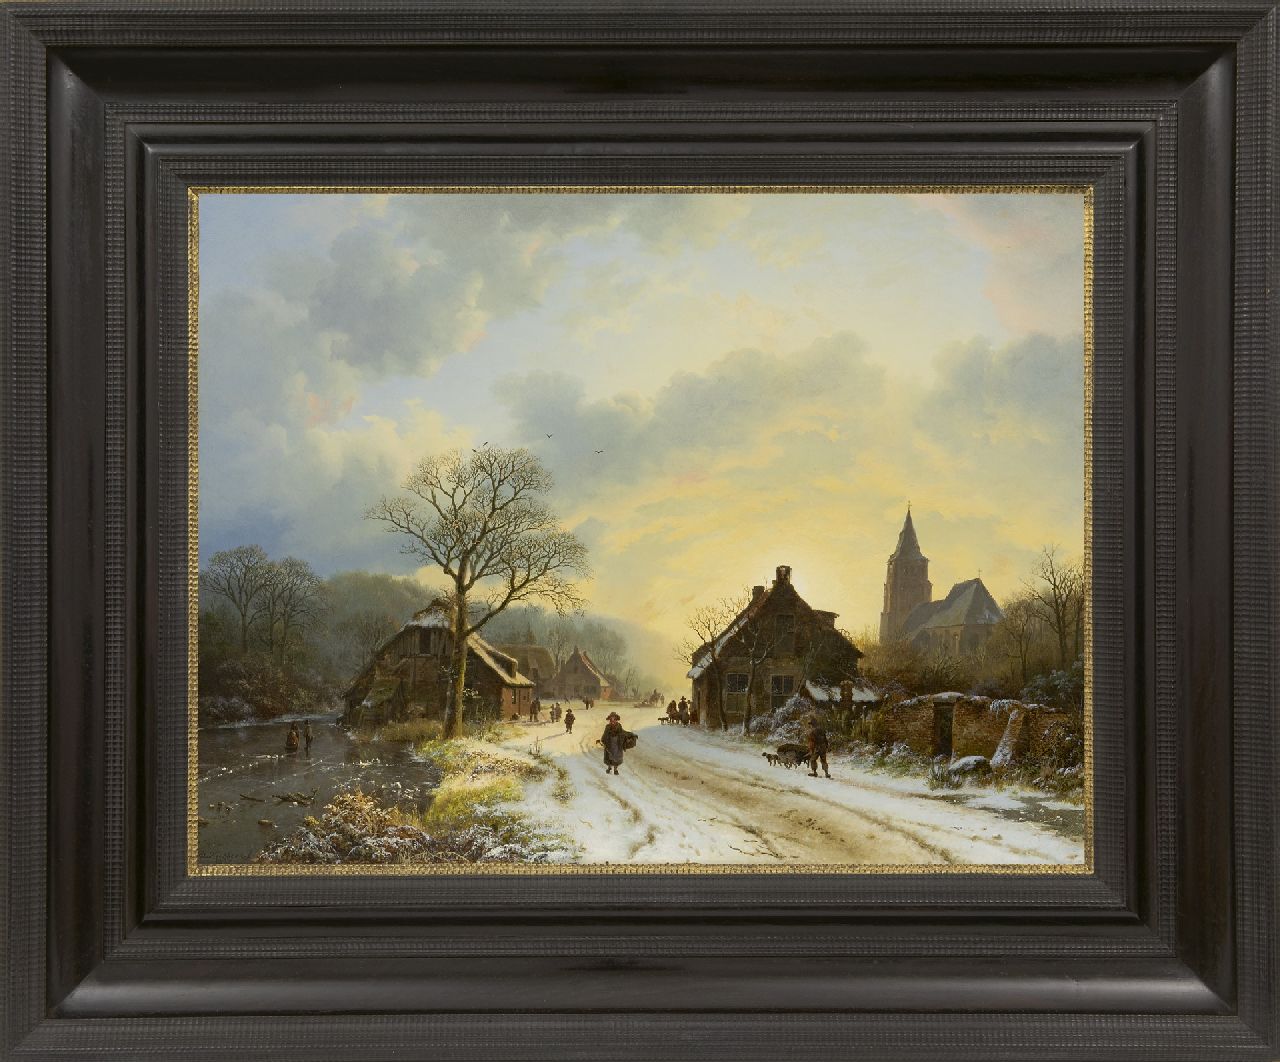 Koekkoek B.C.  | Barend Cornelis Koekkoek, A Lower Rhine winter landscape with a church inspired by the village church at Aerdt, oil on canvas 39.7 x 52.4 cm, signed l.l. and dated 1837